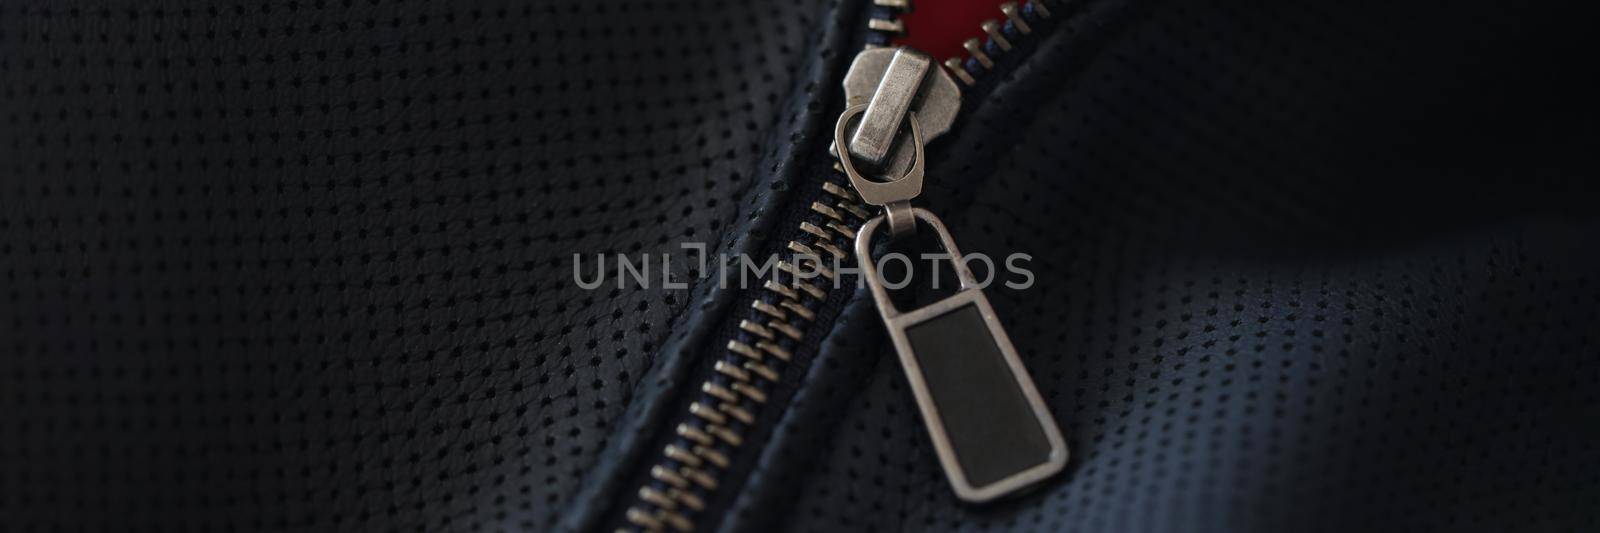 Closeup of steel zipper on leather jacket. Zipper replacement services concept